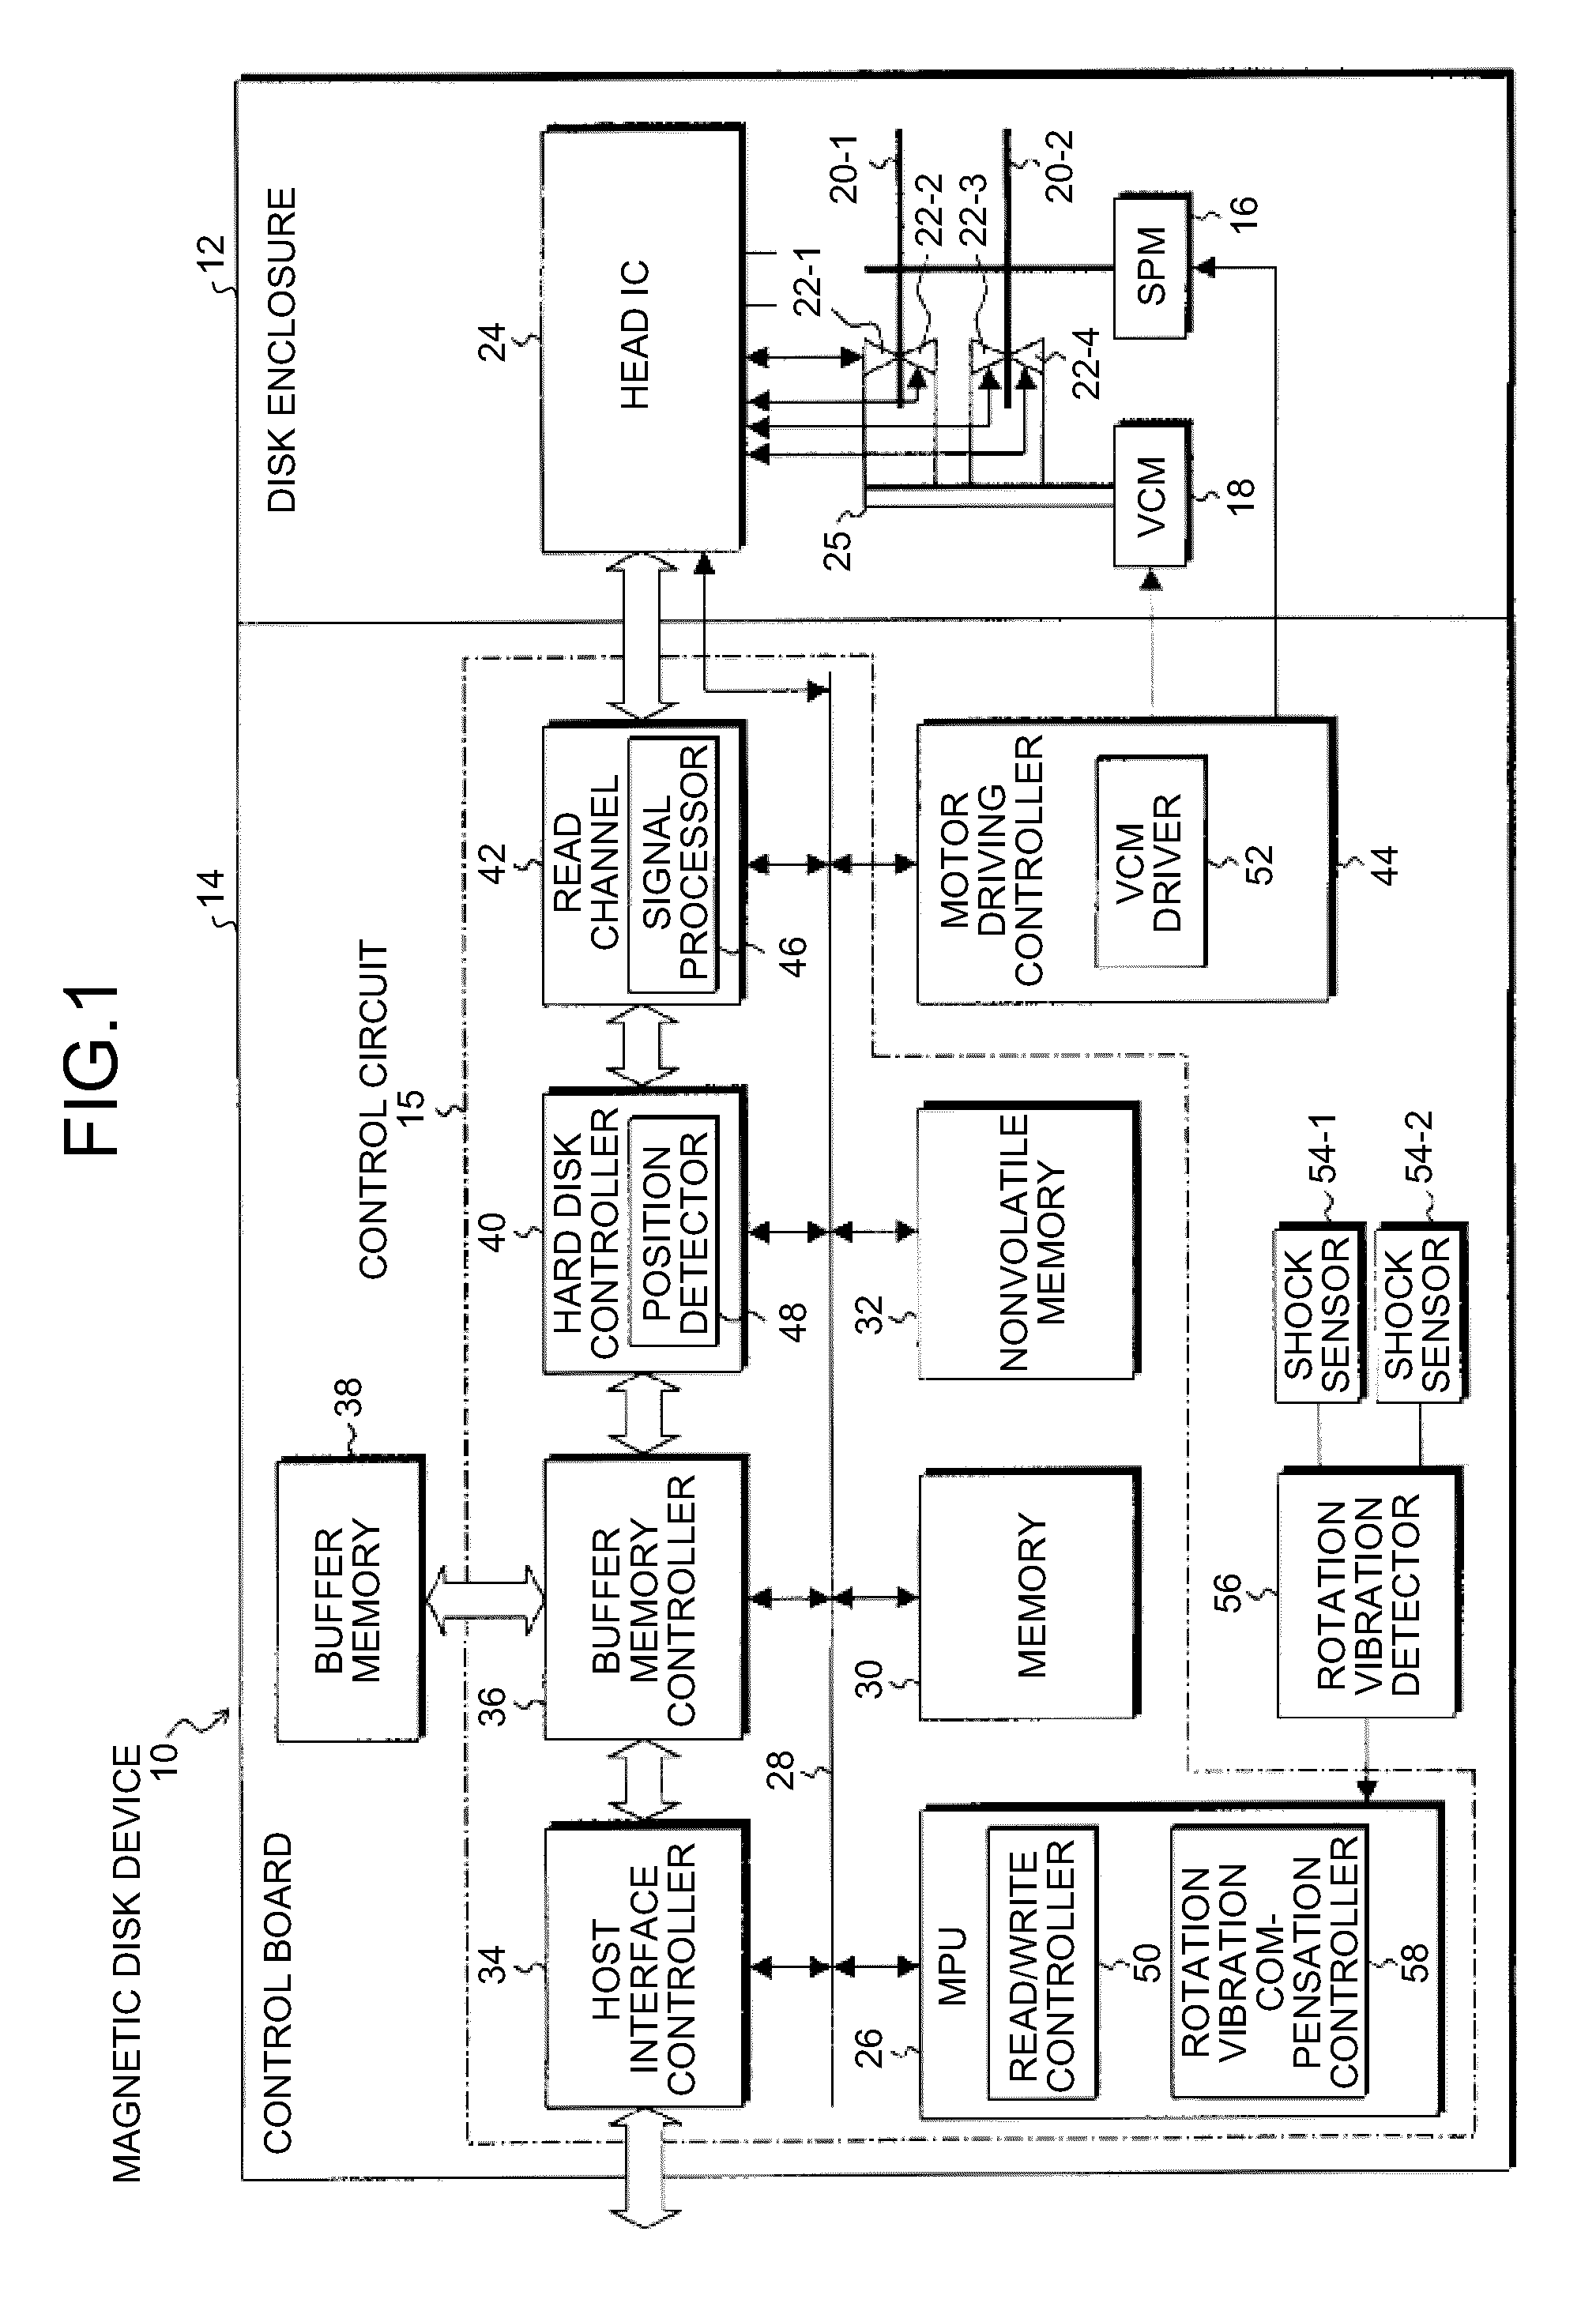 Storage device and control circuit